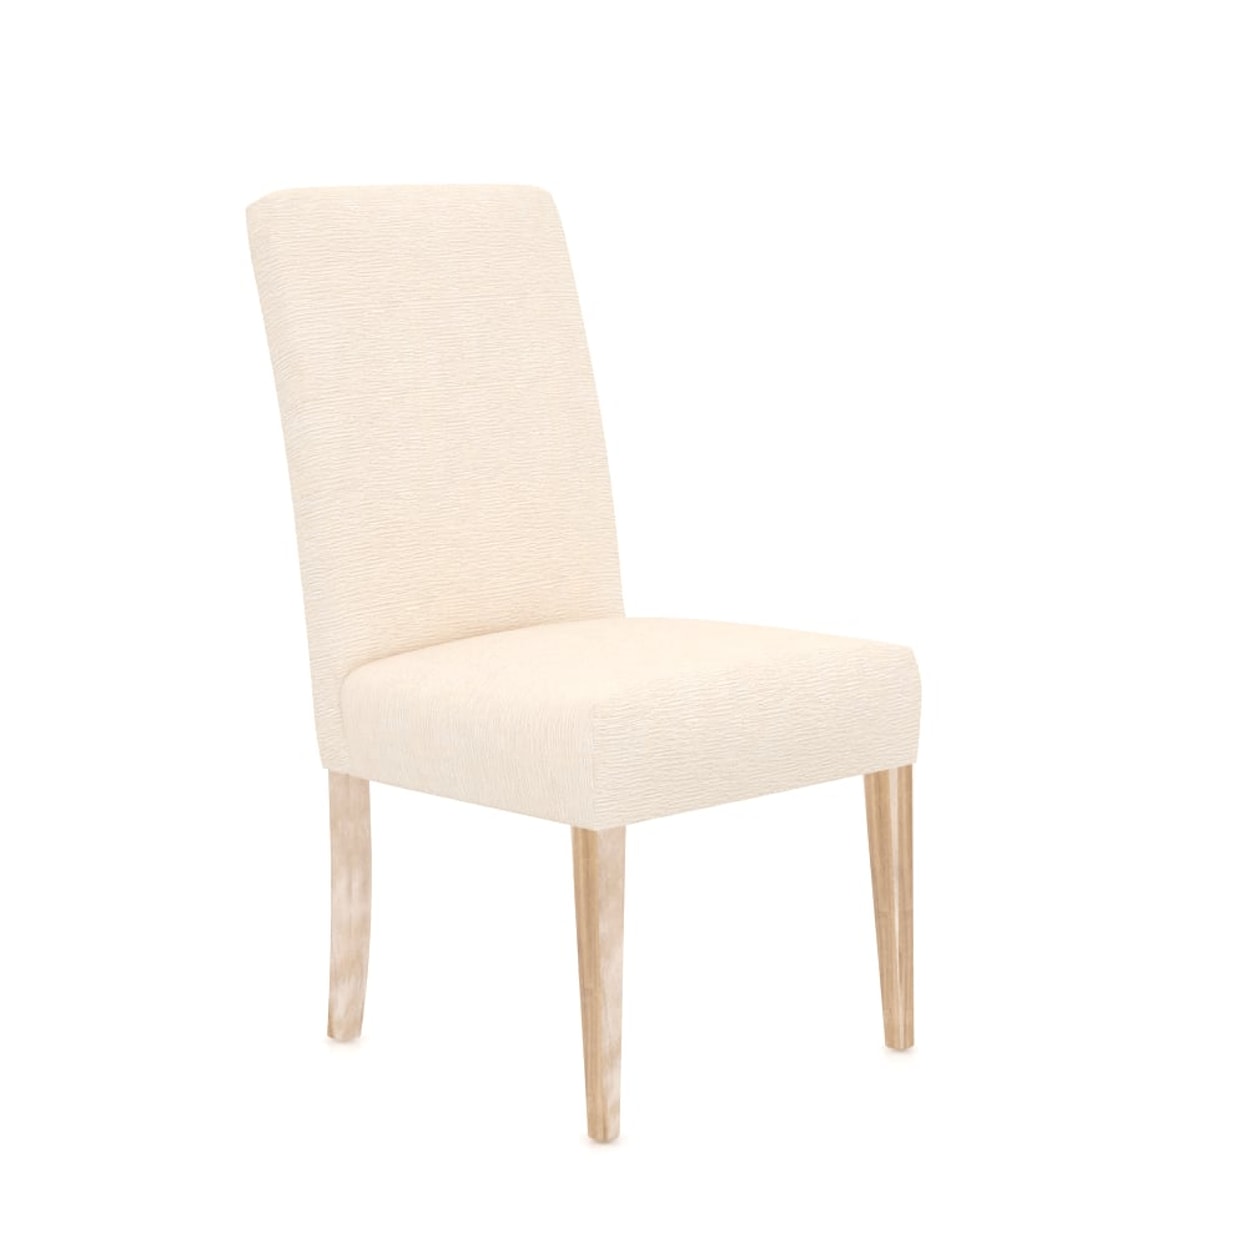 Canadel Loft Customizable Upholstered Dining Chair